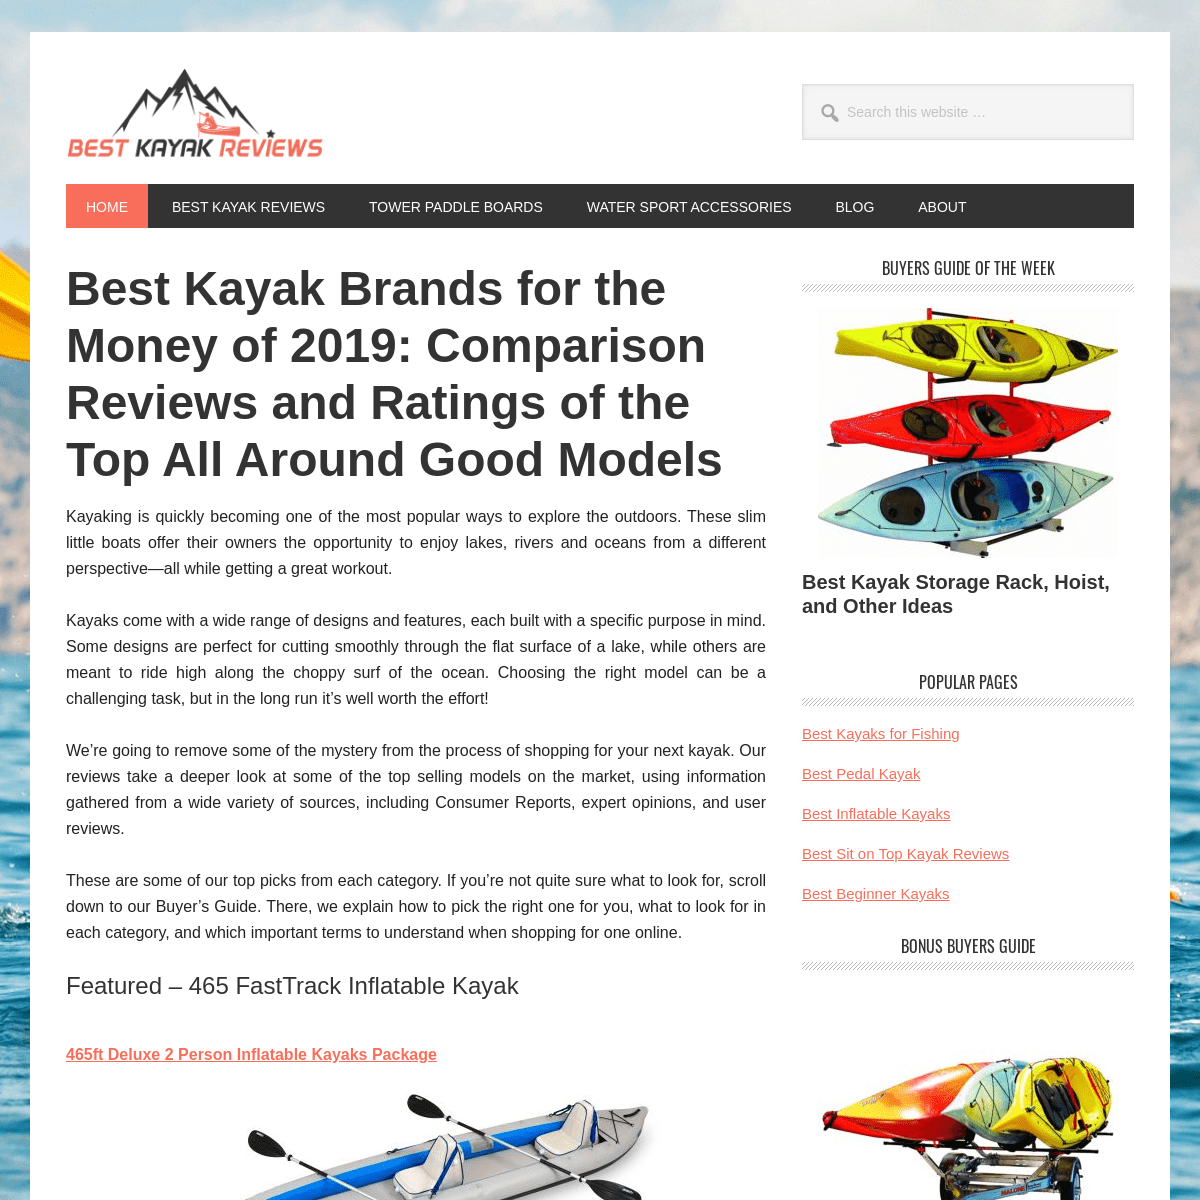 A complete backup of bestkayaks.reviews